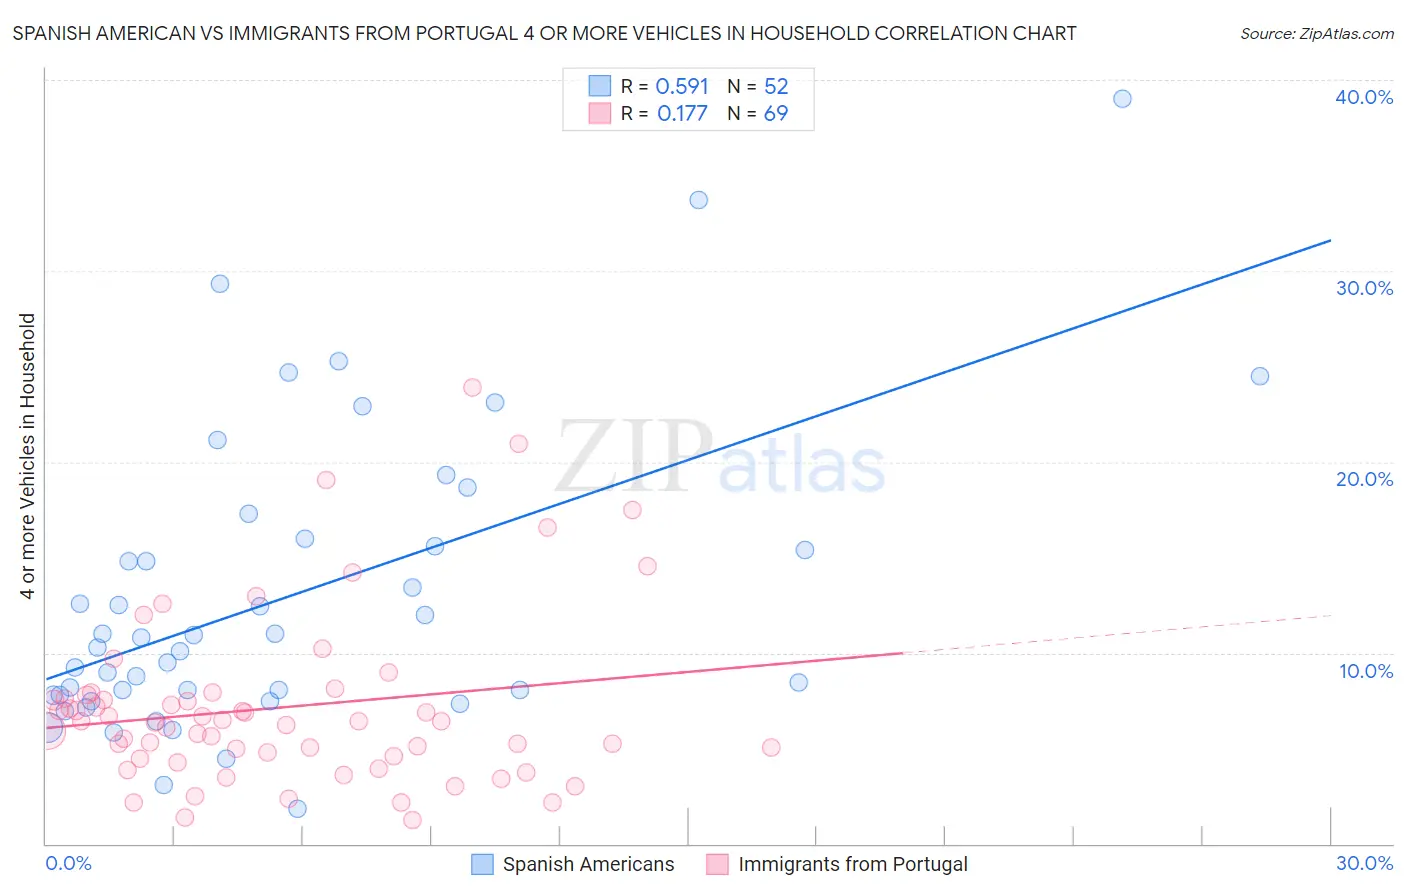 Spanish American vs Immigrants from Portugal 4 or more Vehicles in Household